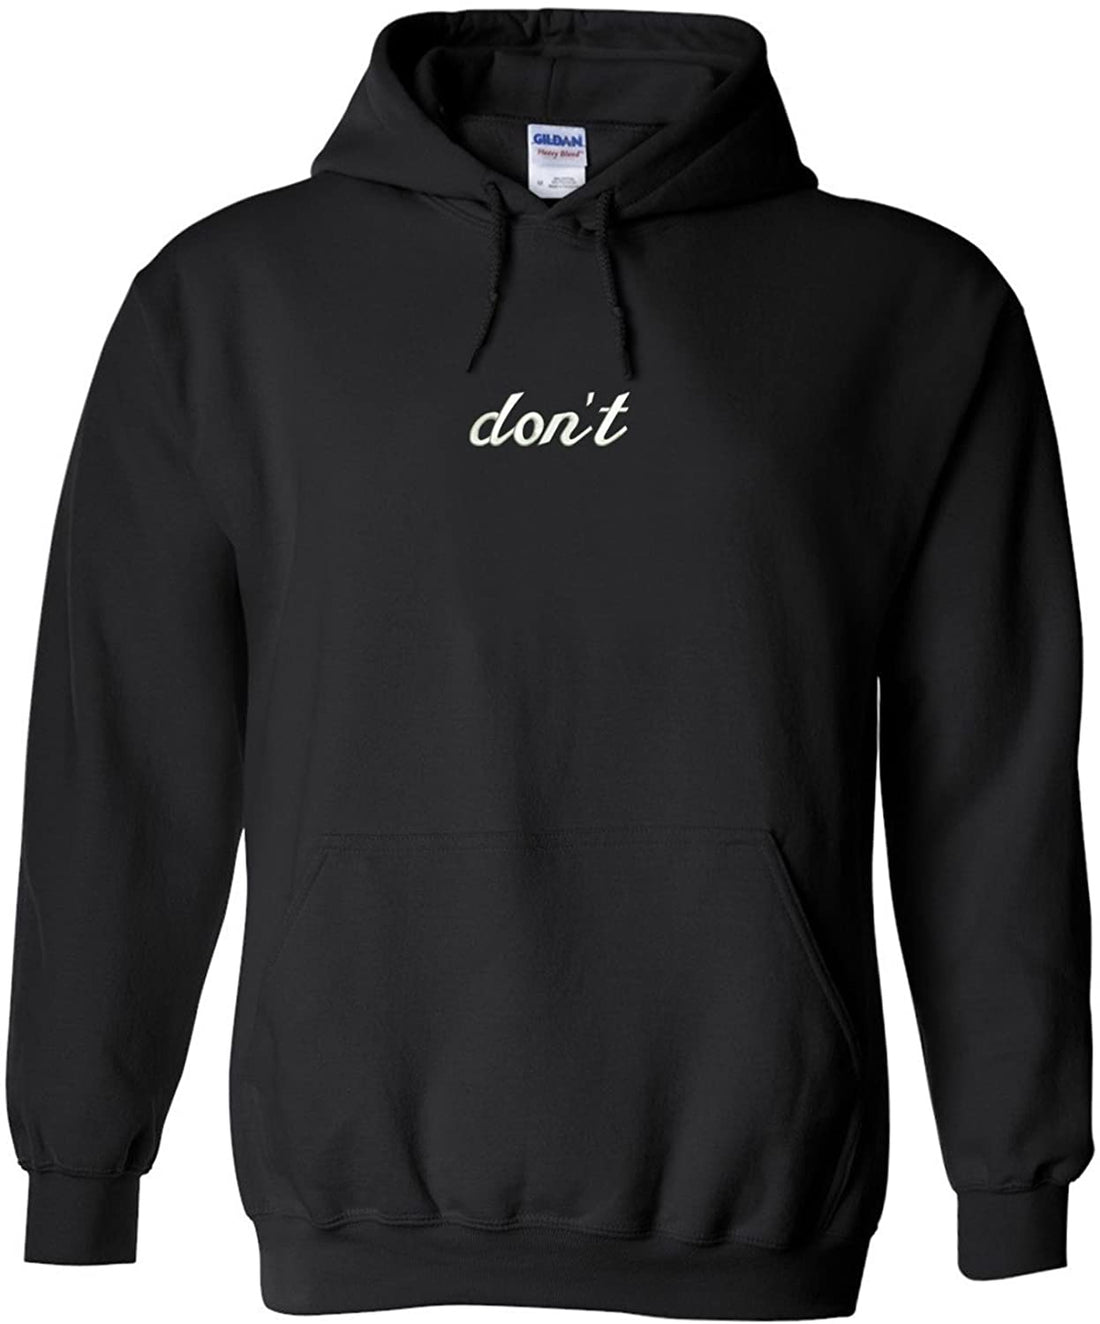 Trendy Apparel Shop Don't Embroidered Heavy Blend Hoodie